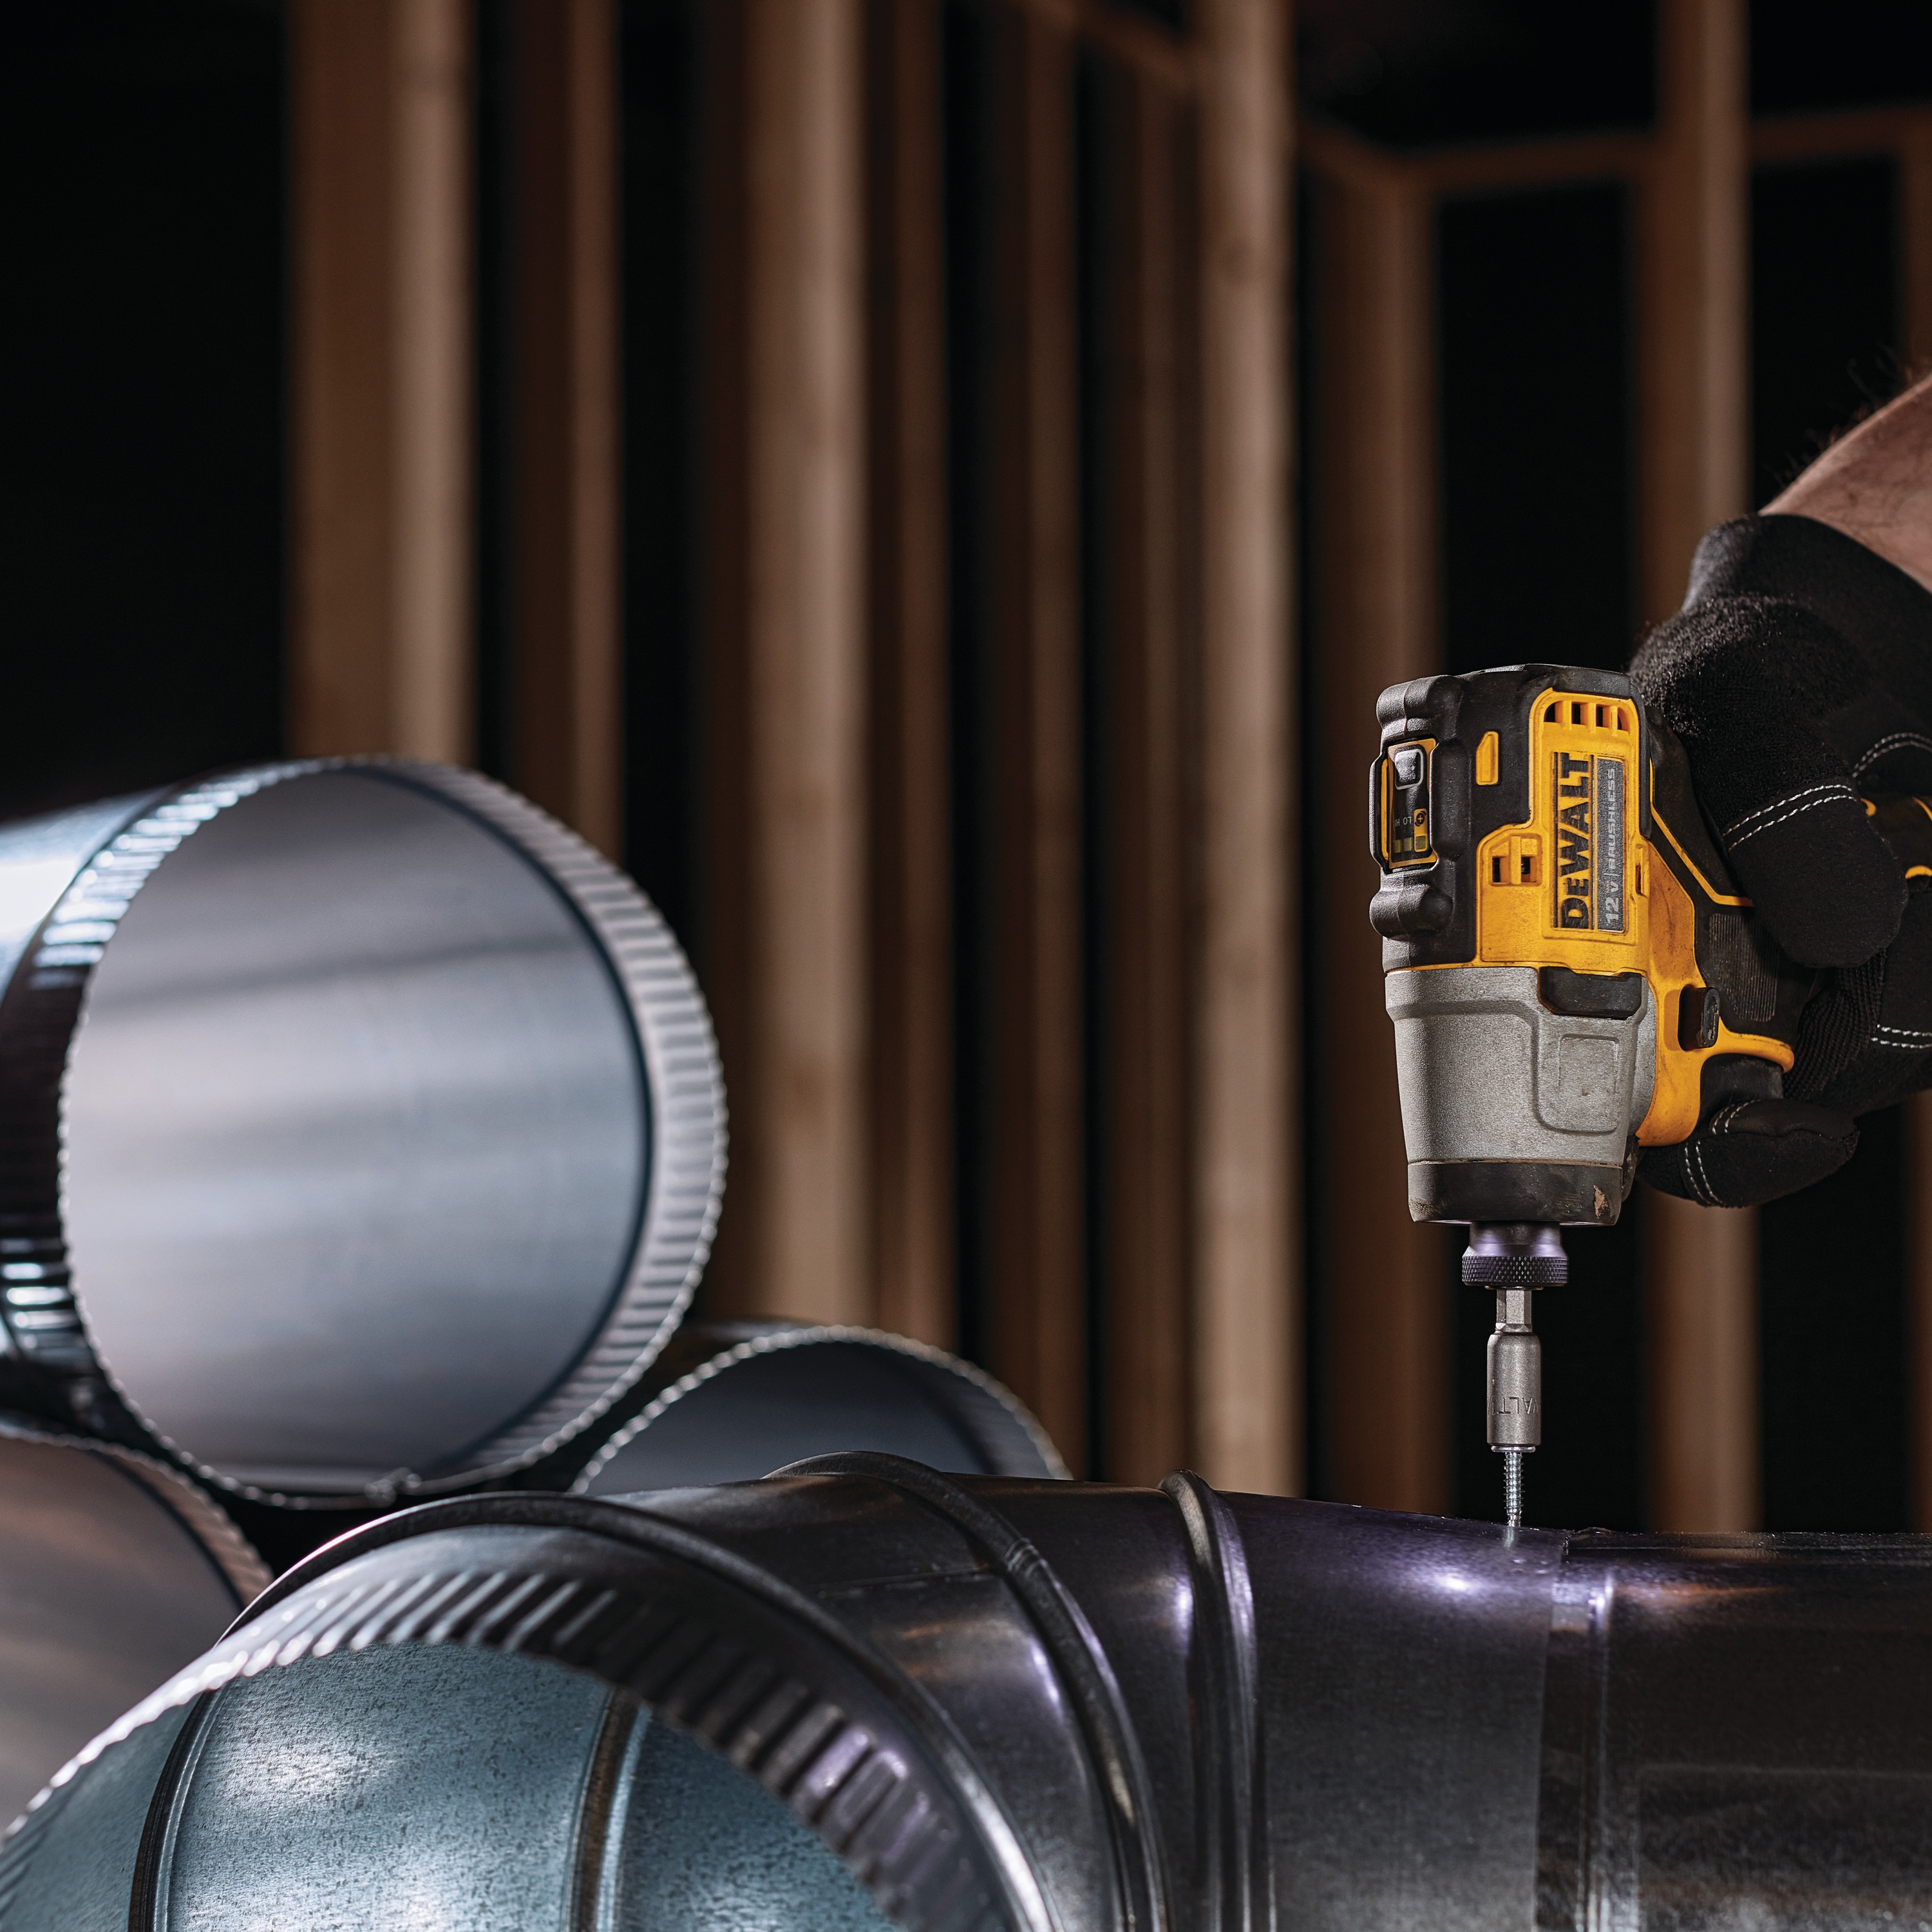 XTREME Brushless cordless impact driver fastening screw in ventilation pipe.